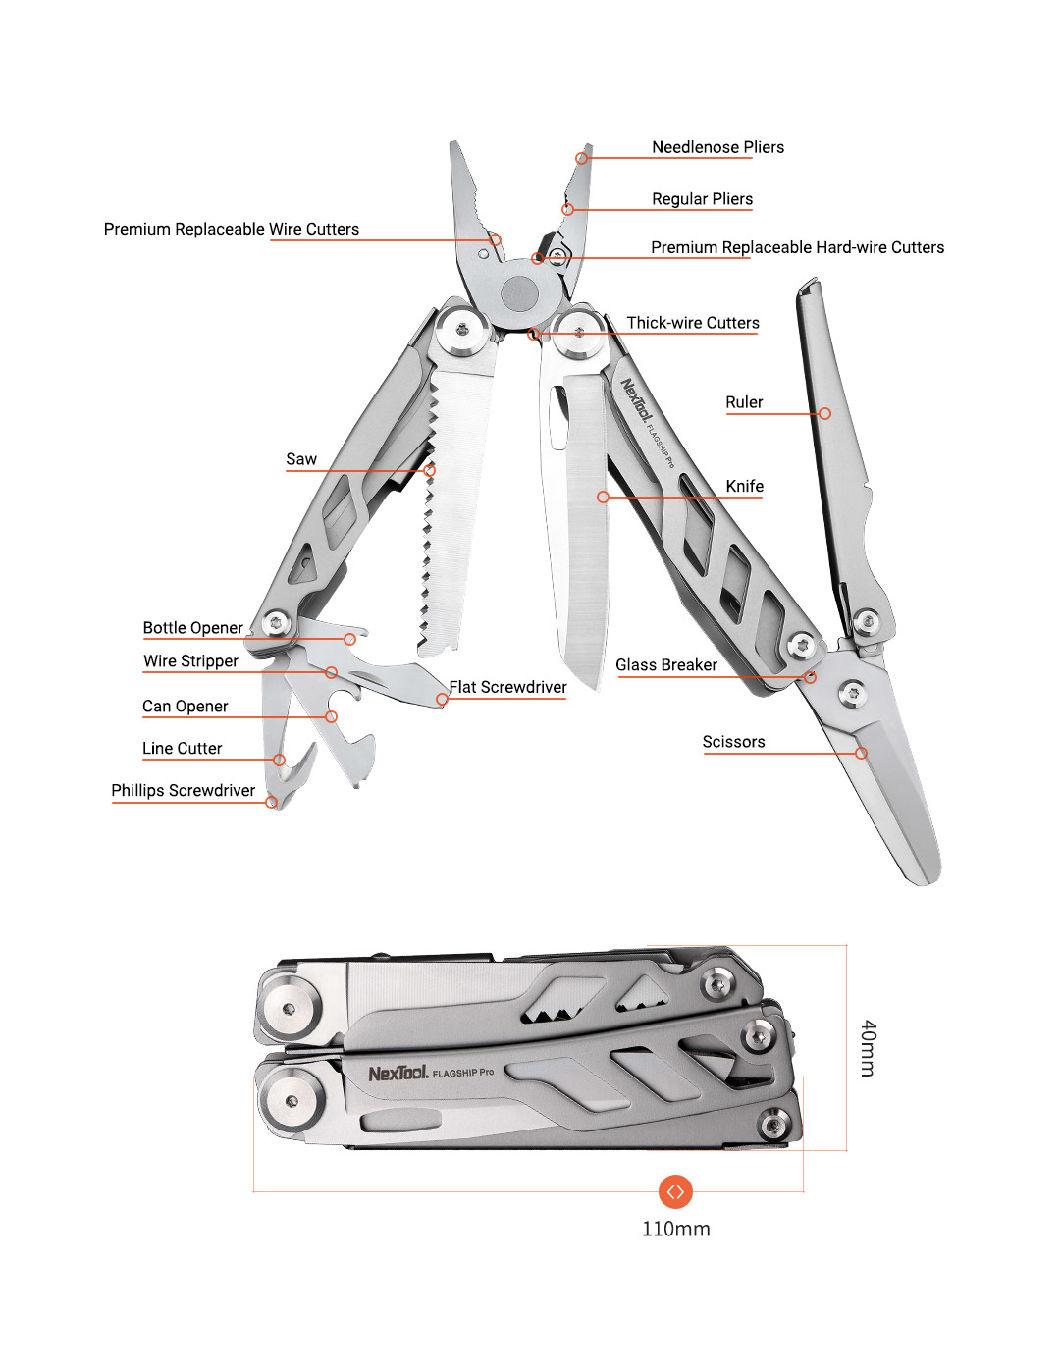 Nextool 16 Functions Pocket Pliers Multitool with Camping Knife